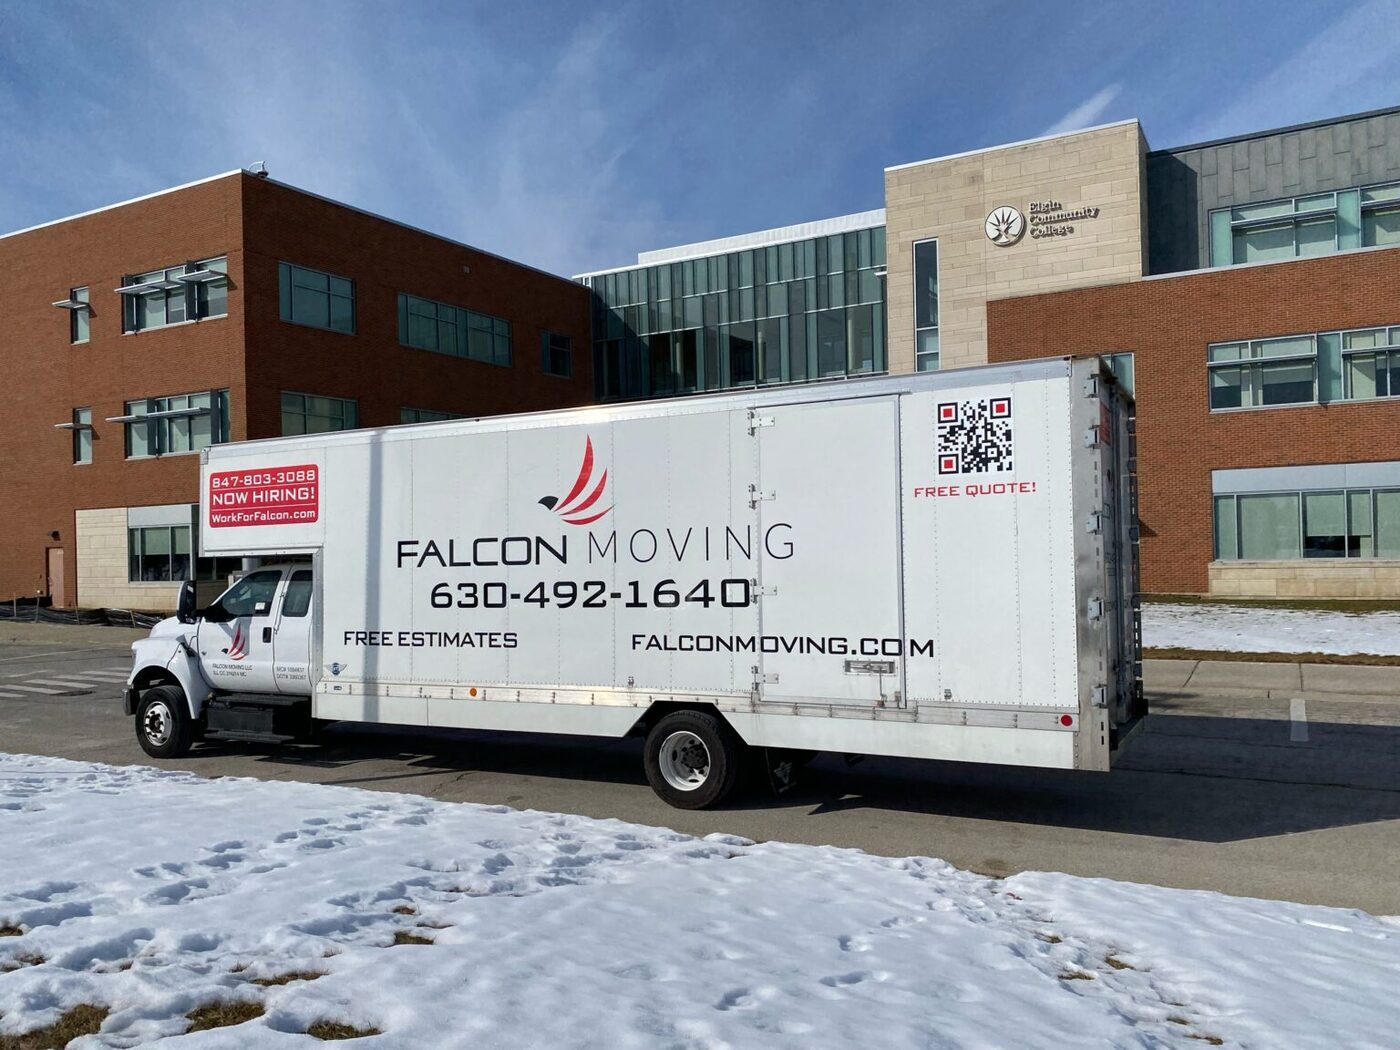 Falcon Moving, LLC (Illinois) in Elgin, IL, was founded in 2016.